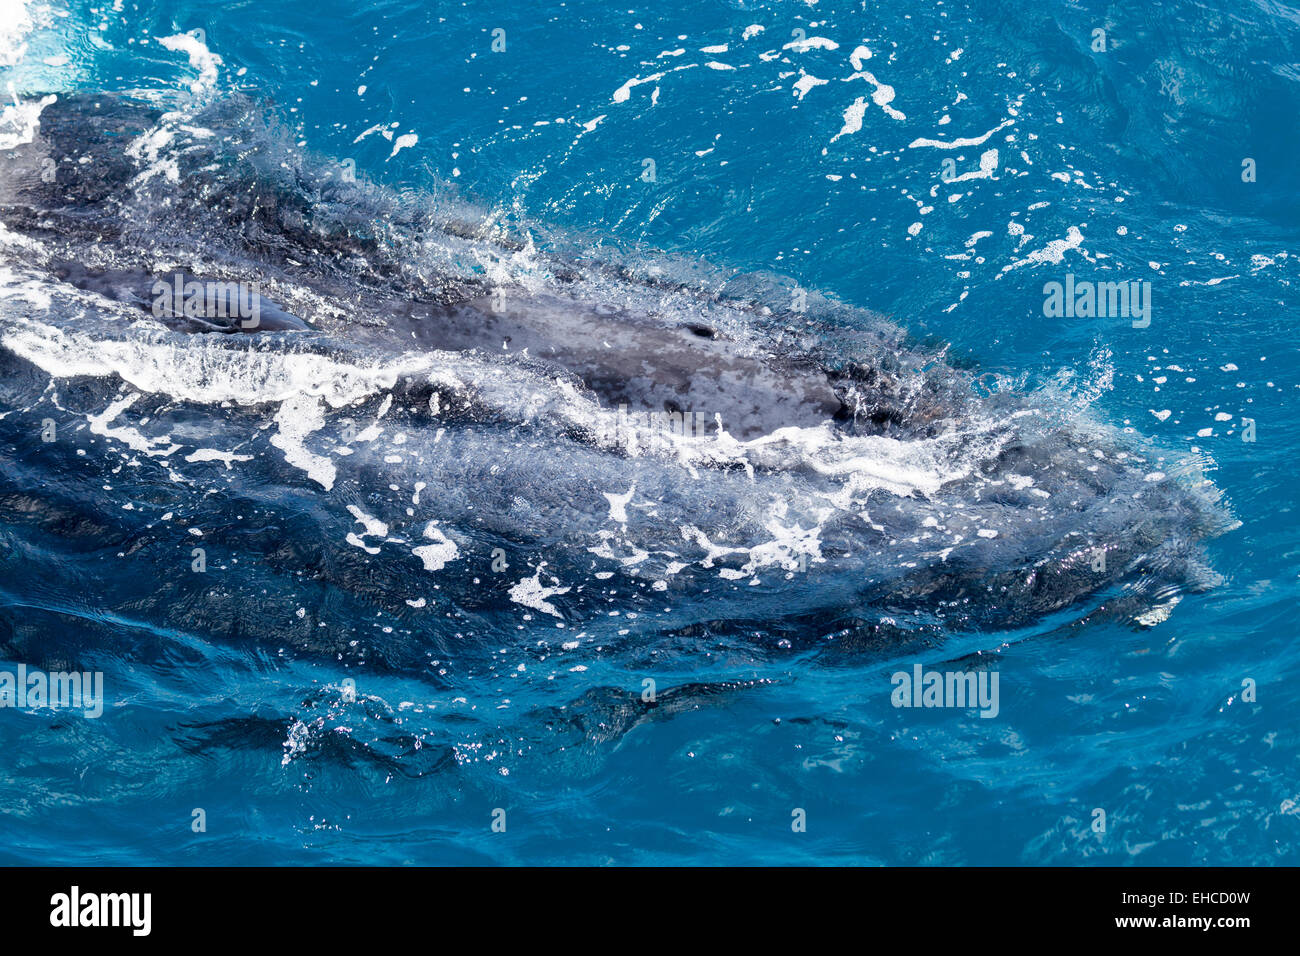 Humpback whale at Hervey Bay queensland Stock Photo